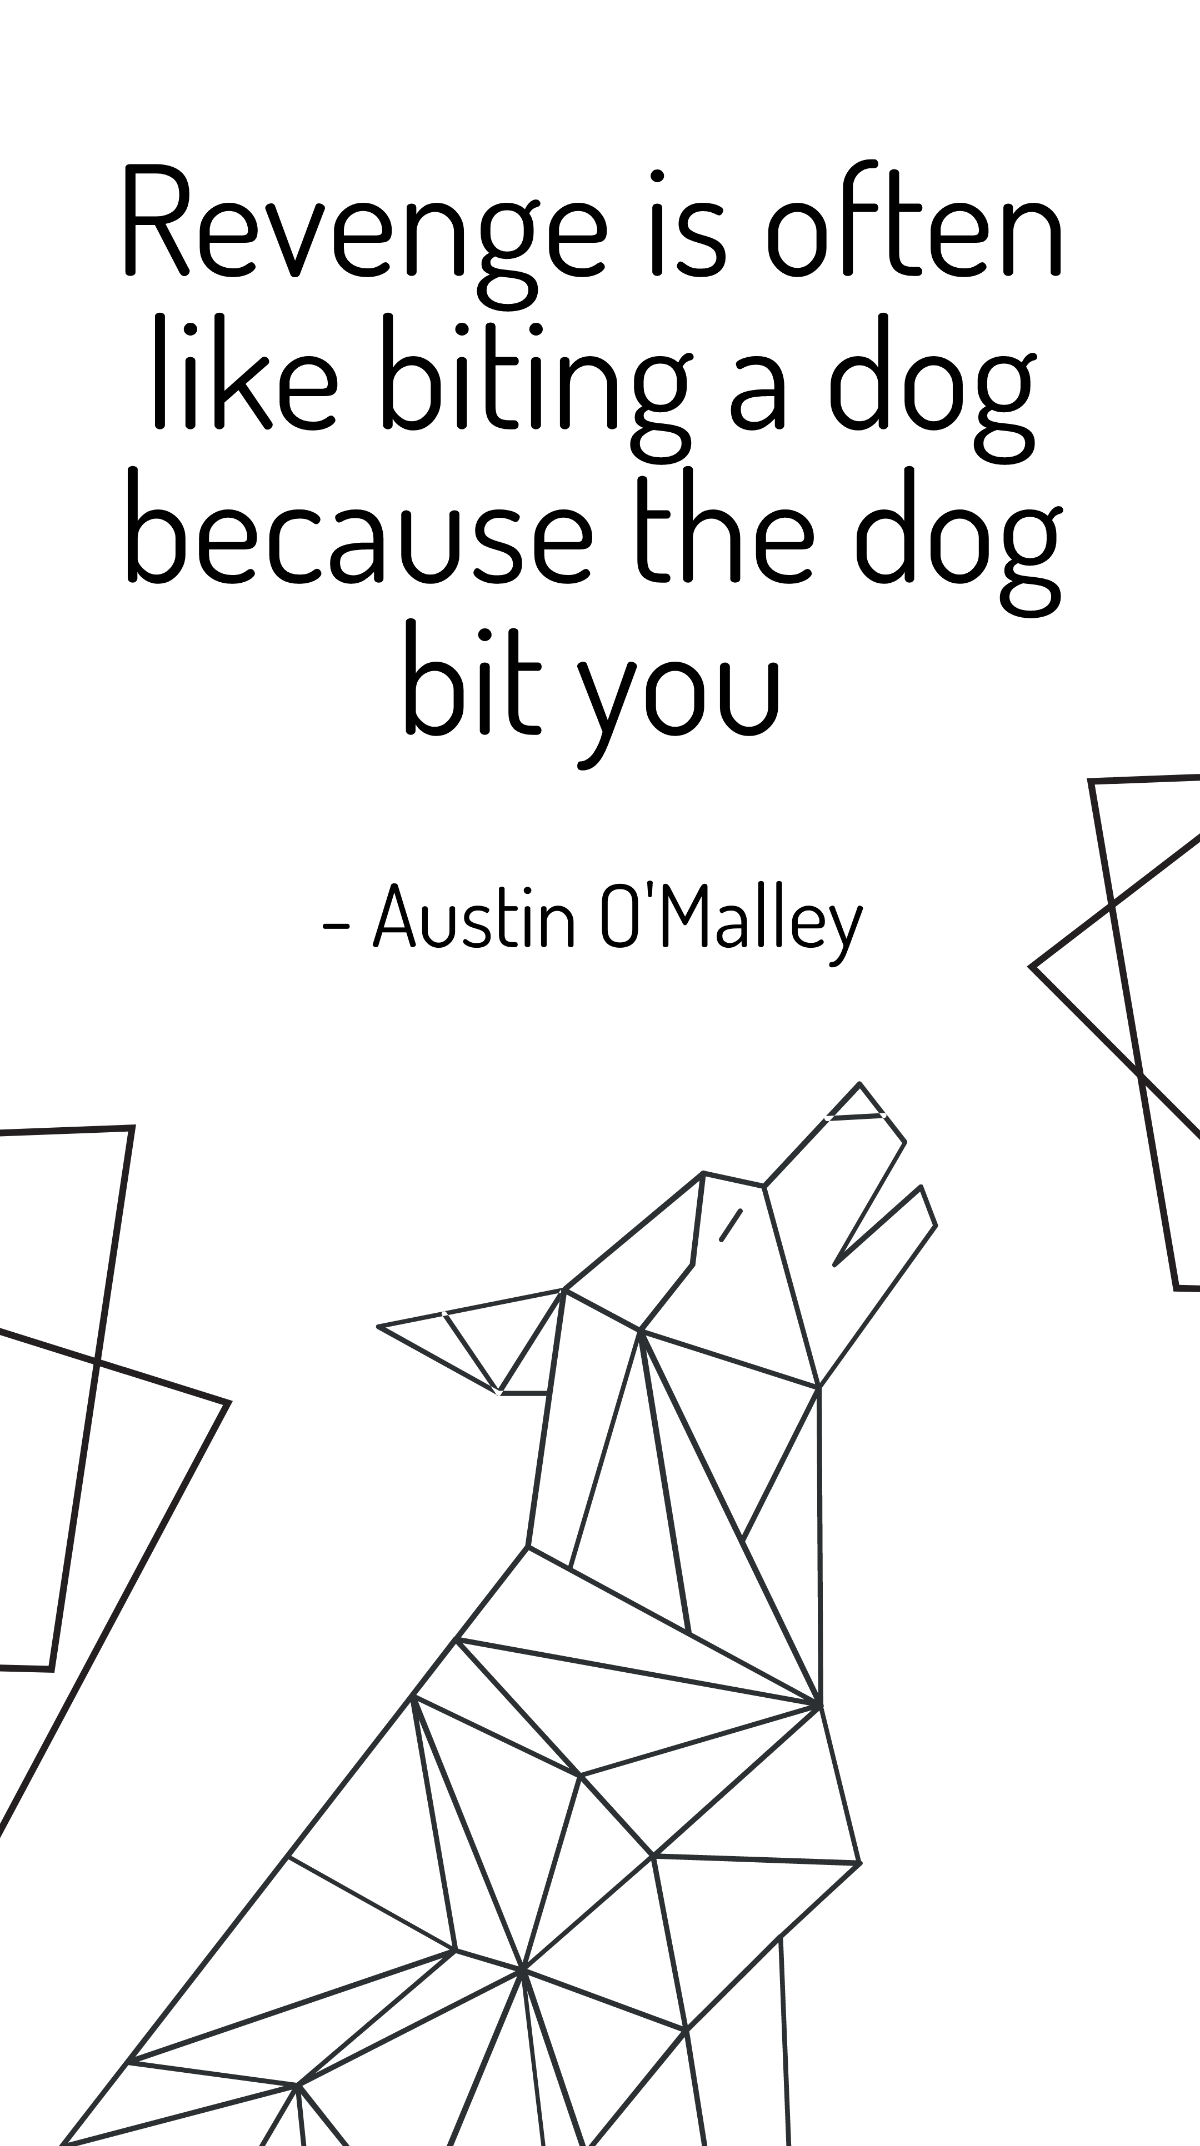 Austin O'Malley - Revenge is often like biting a dog because the dog bit you Template